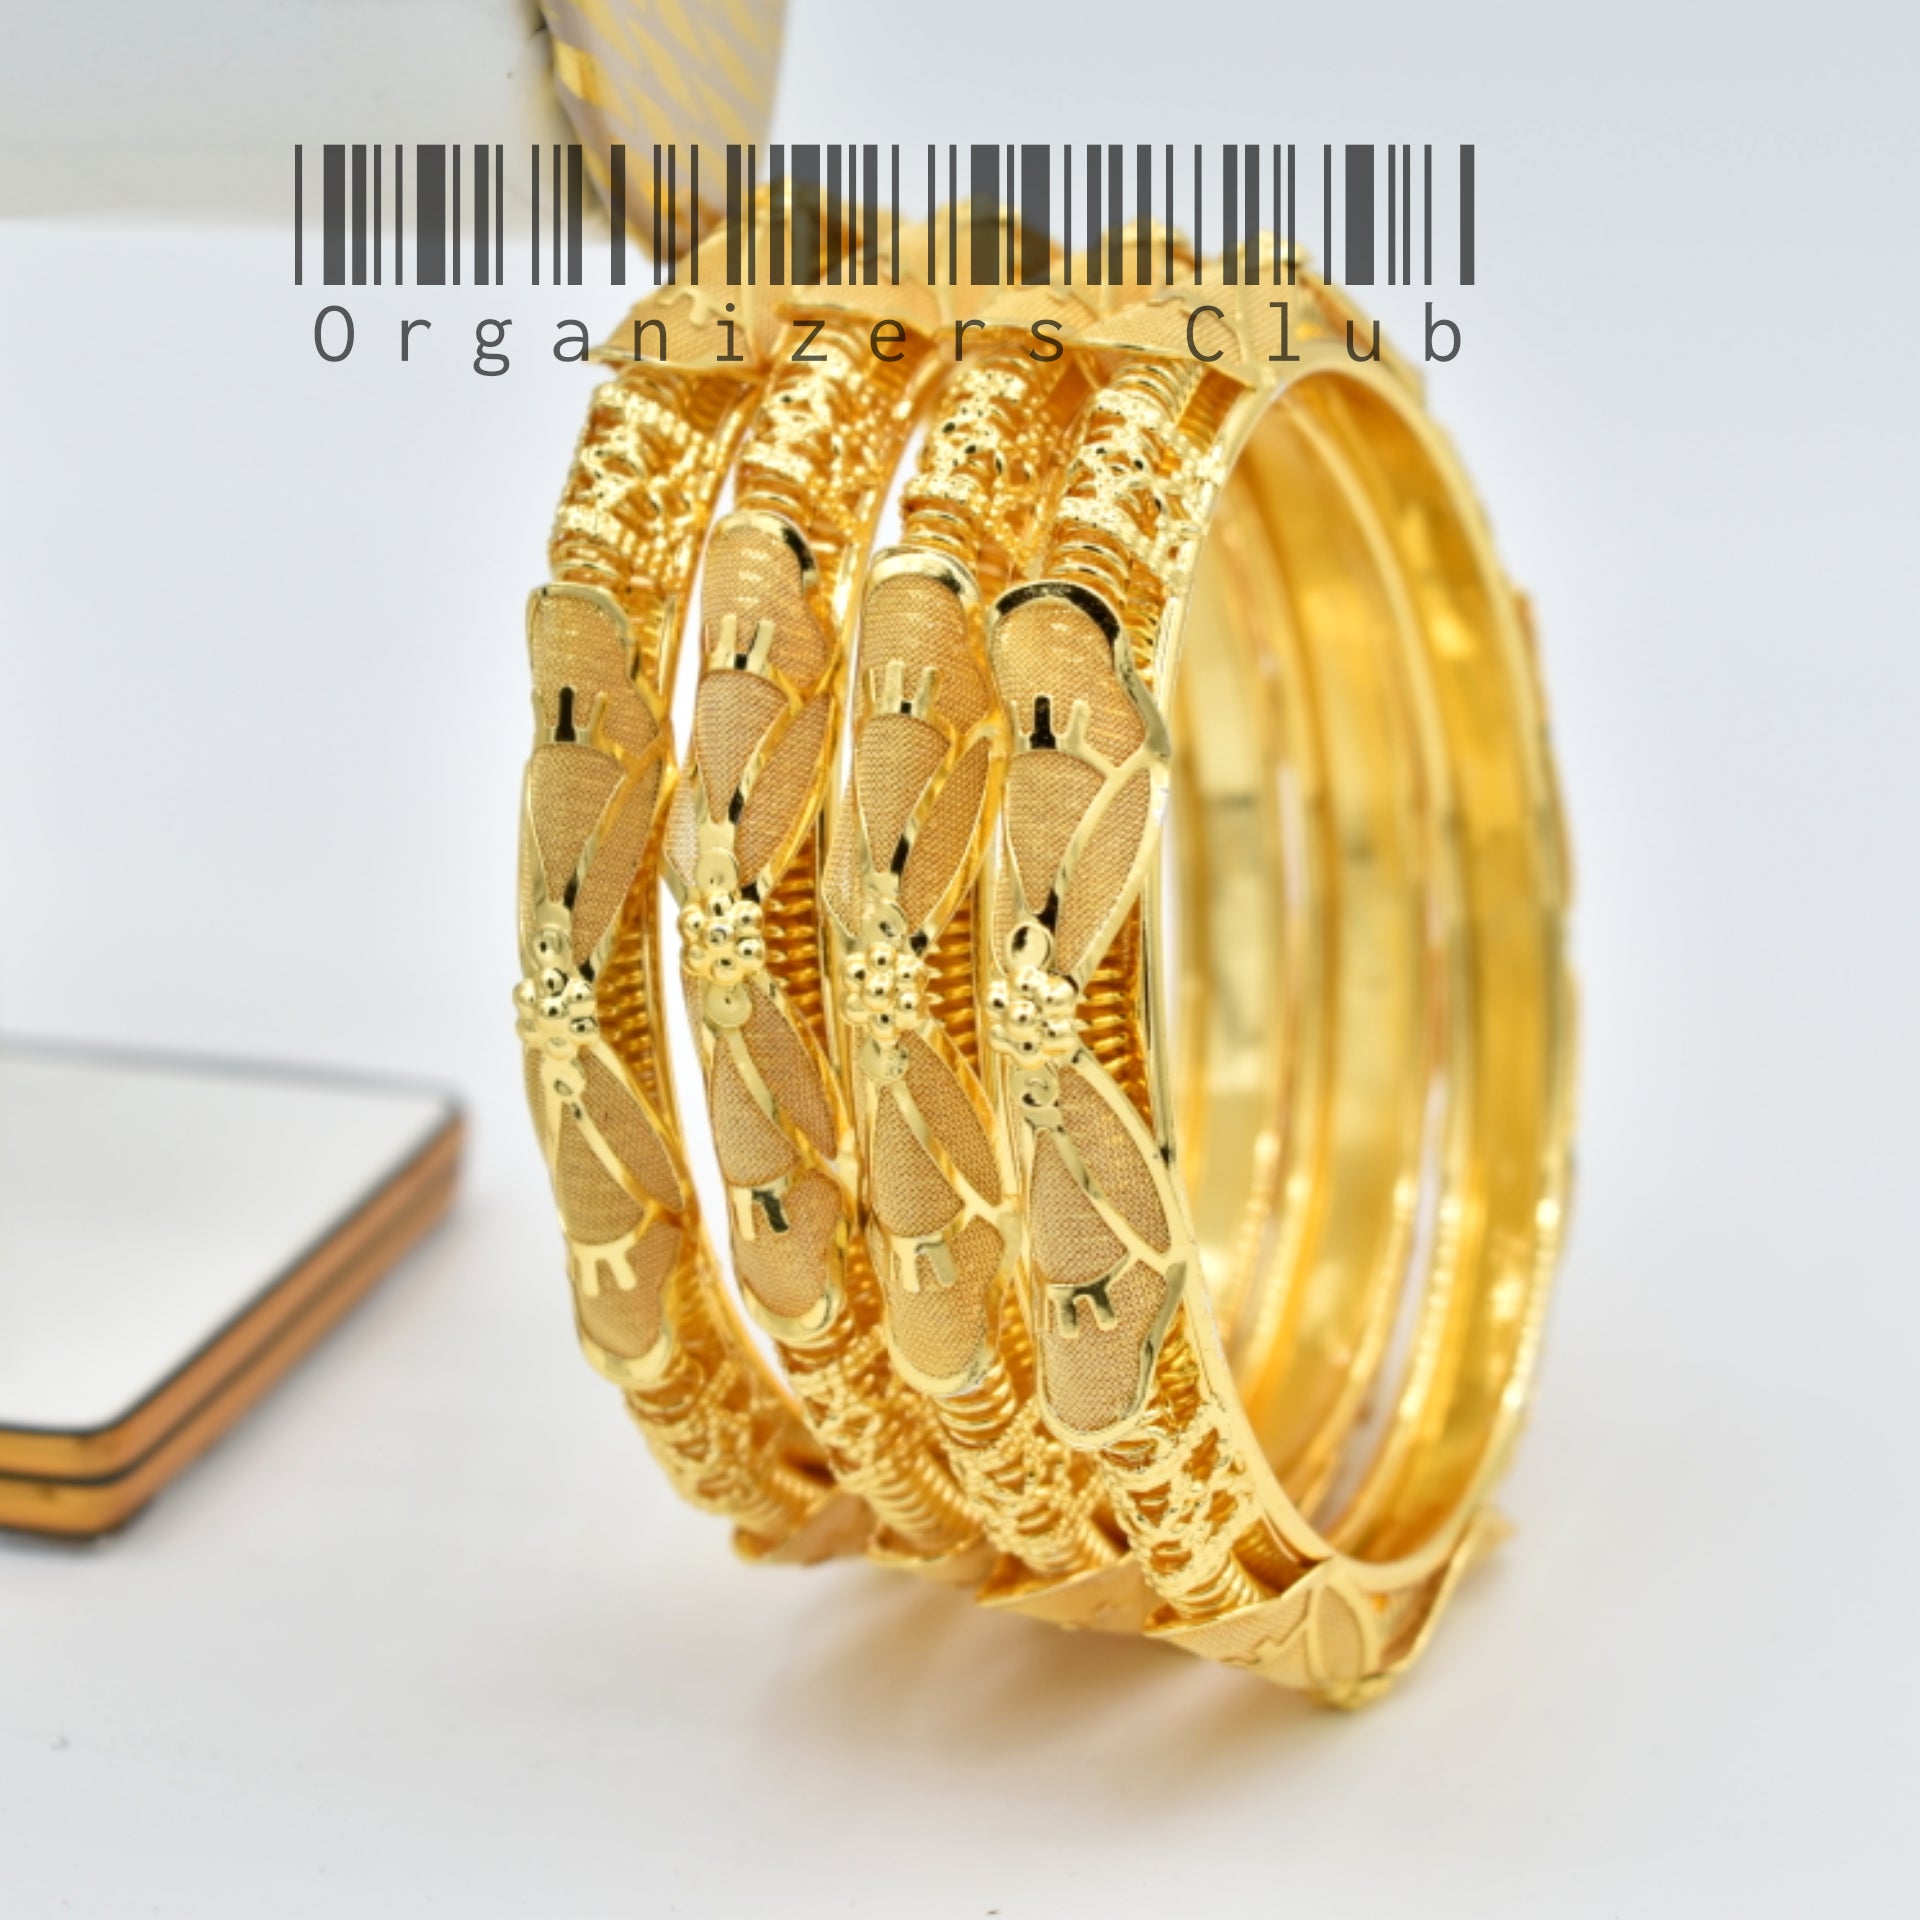 New Arrival Bangles Set For Women Girls With Fancy Jewelry Box Free